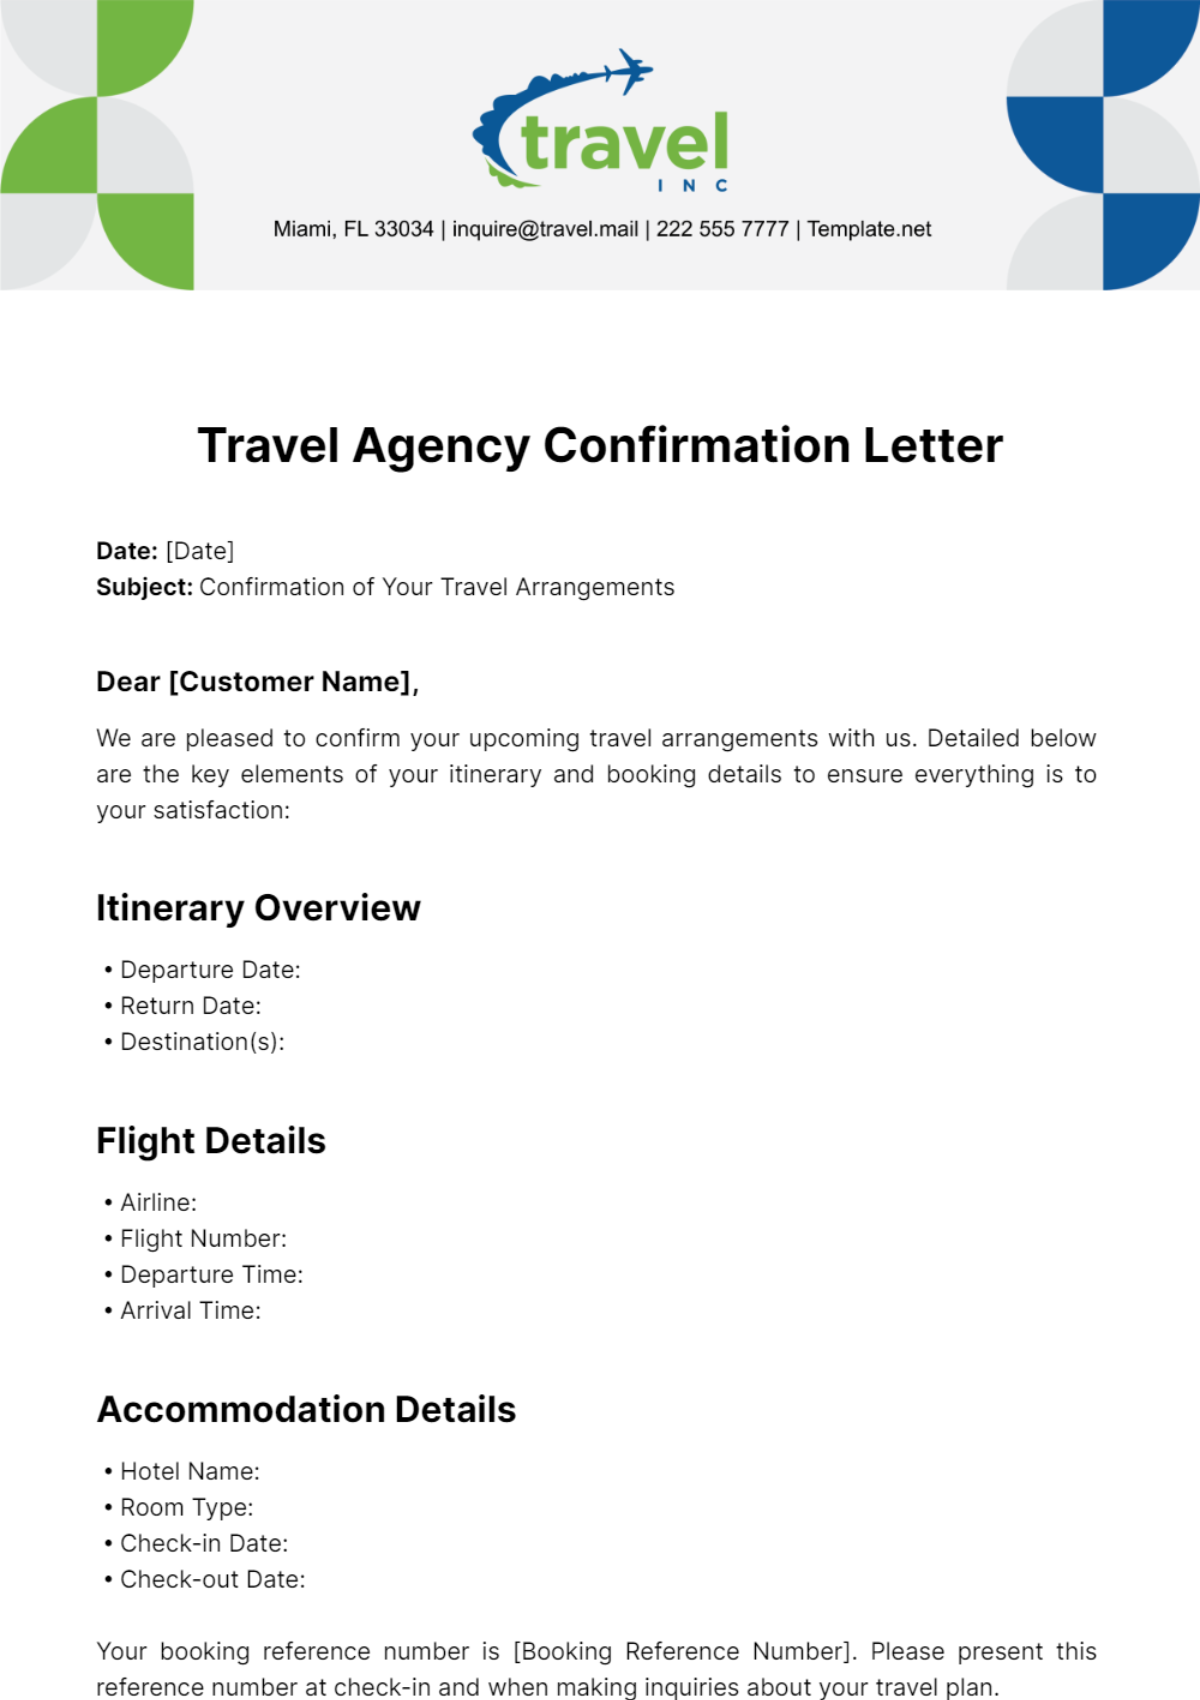 Travel Agency Confirmation Letter Template